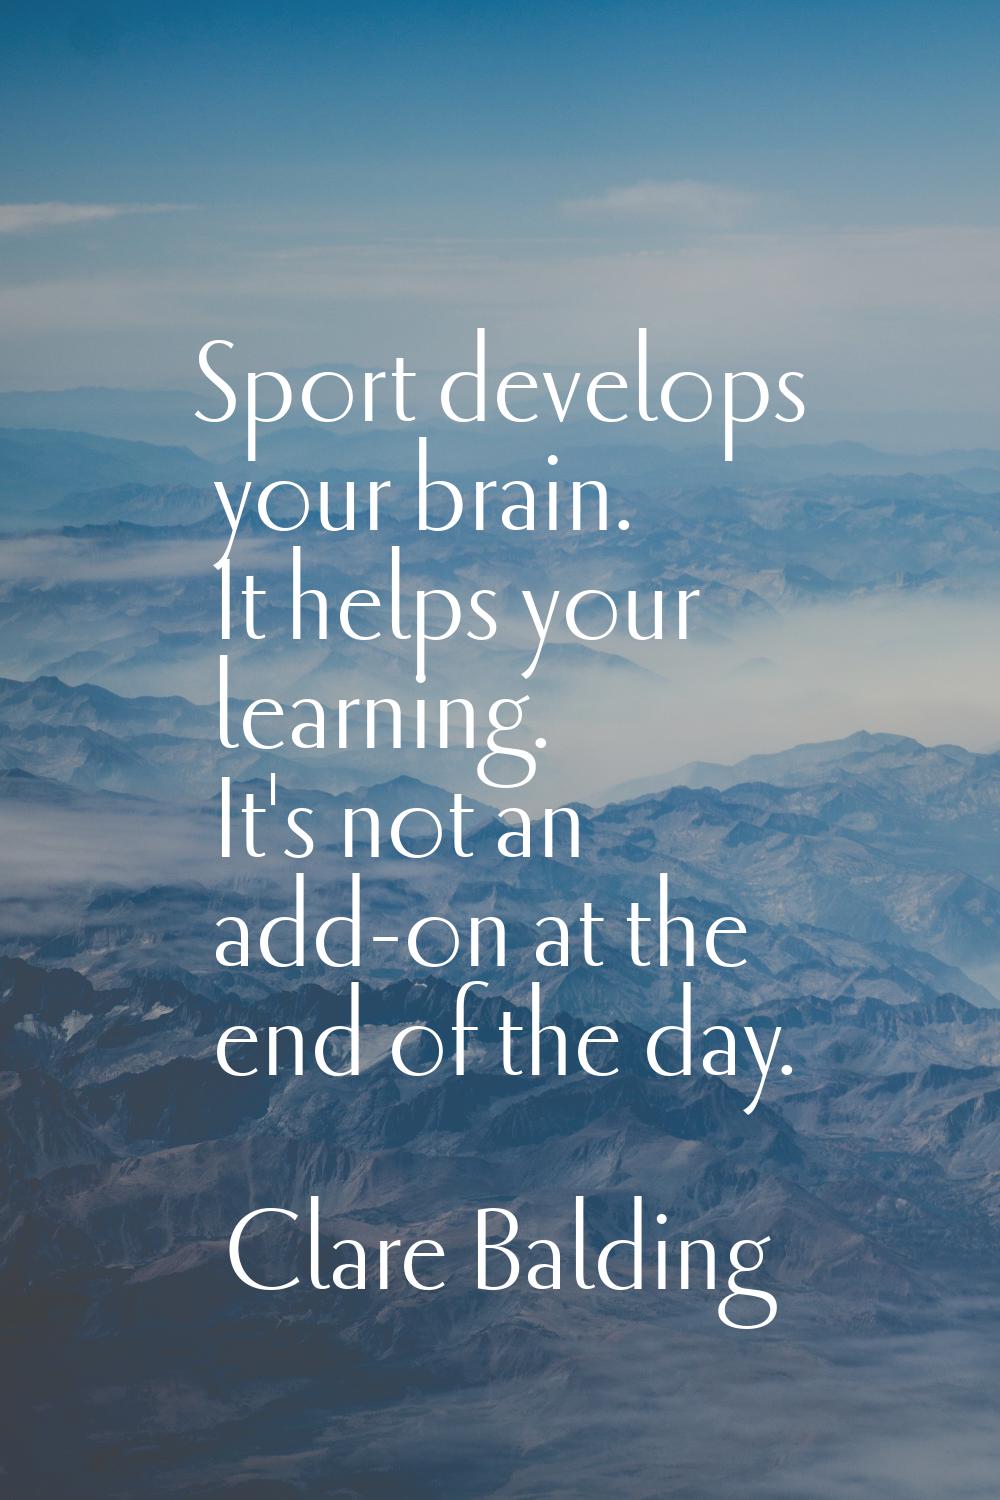 Sport develops your brain. It helps your learning. It's not an add-on at the end of the day.